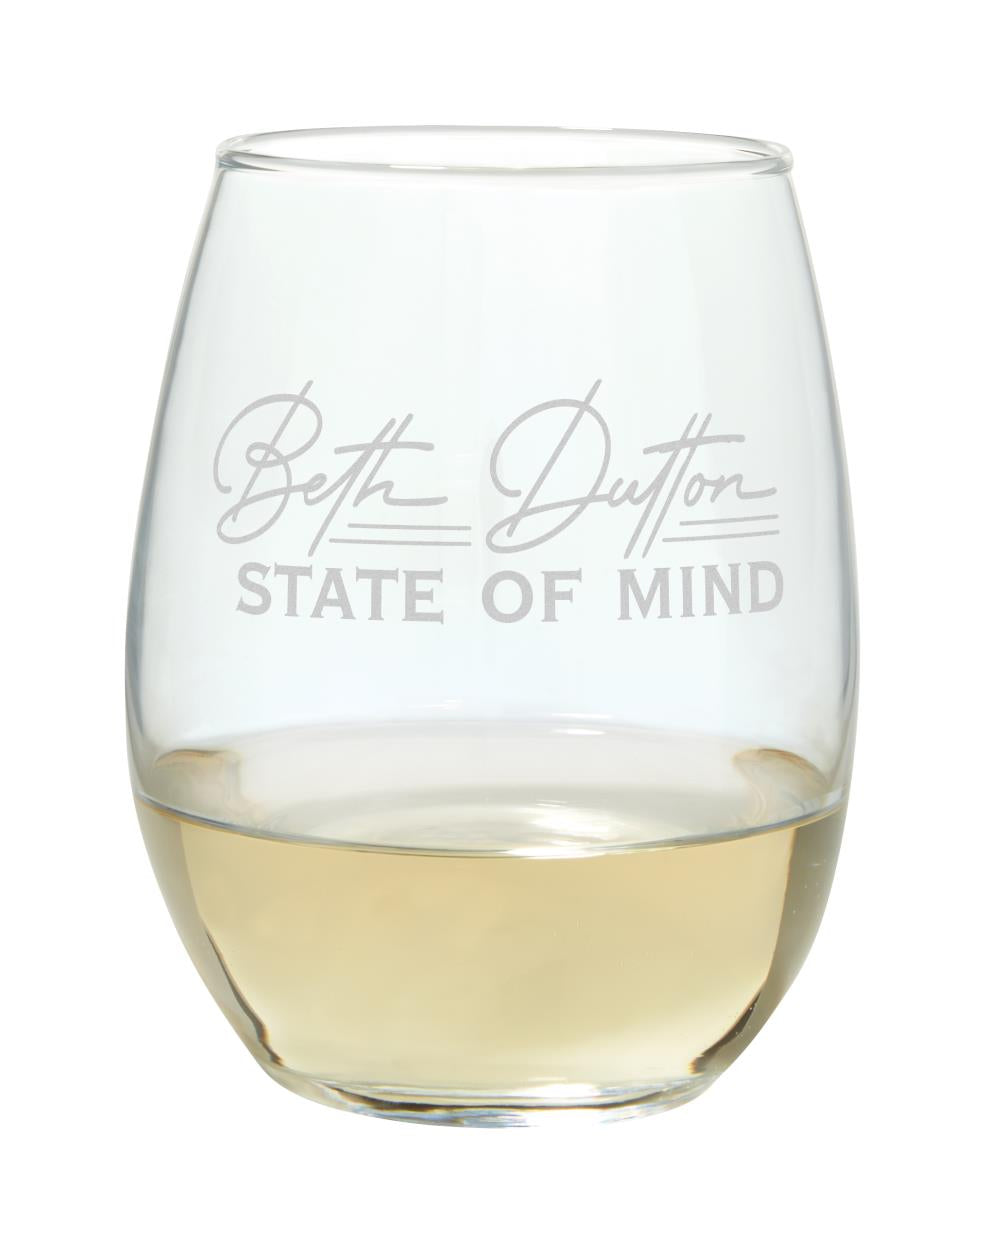 Stemless Wineglass- Beth Dutton State of Mind